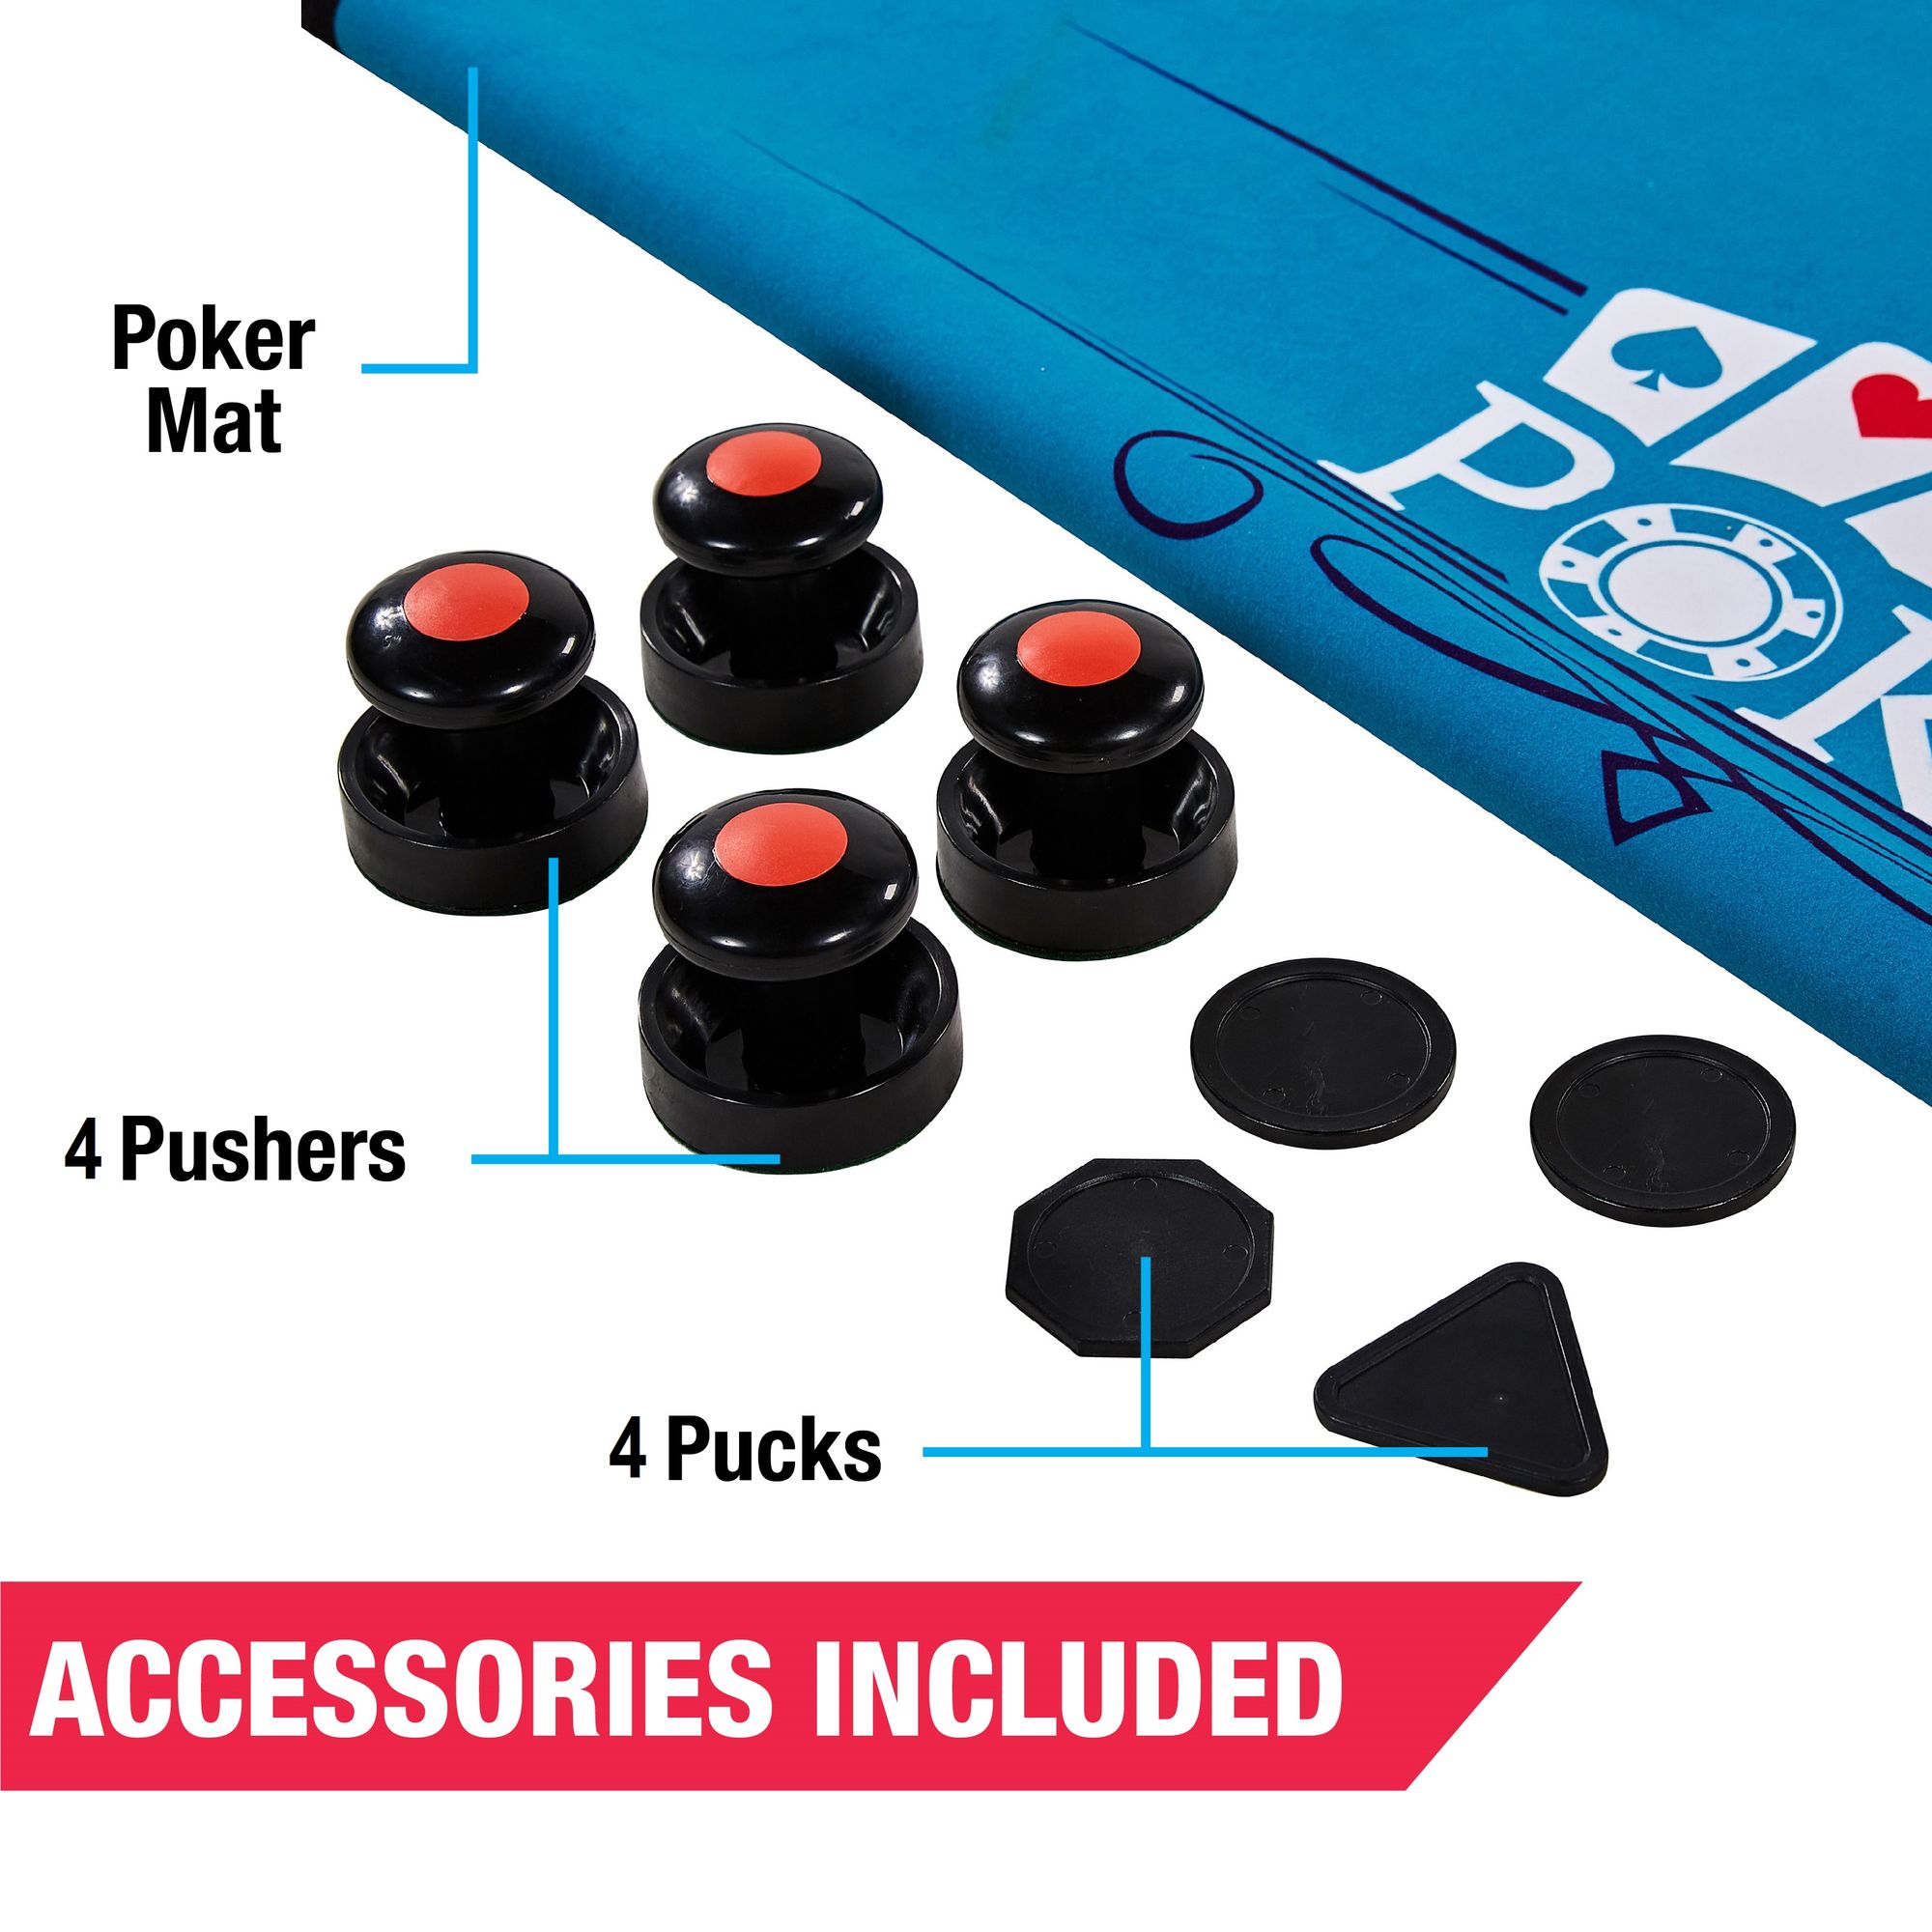 MD Sports Premium Air Powered Hockey Game Table and Portable Poker Mat Top, Accessories Included - image 5 of 13